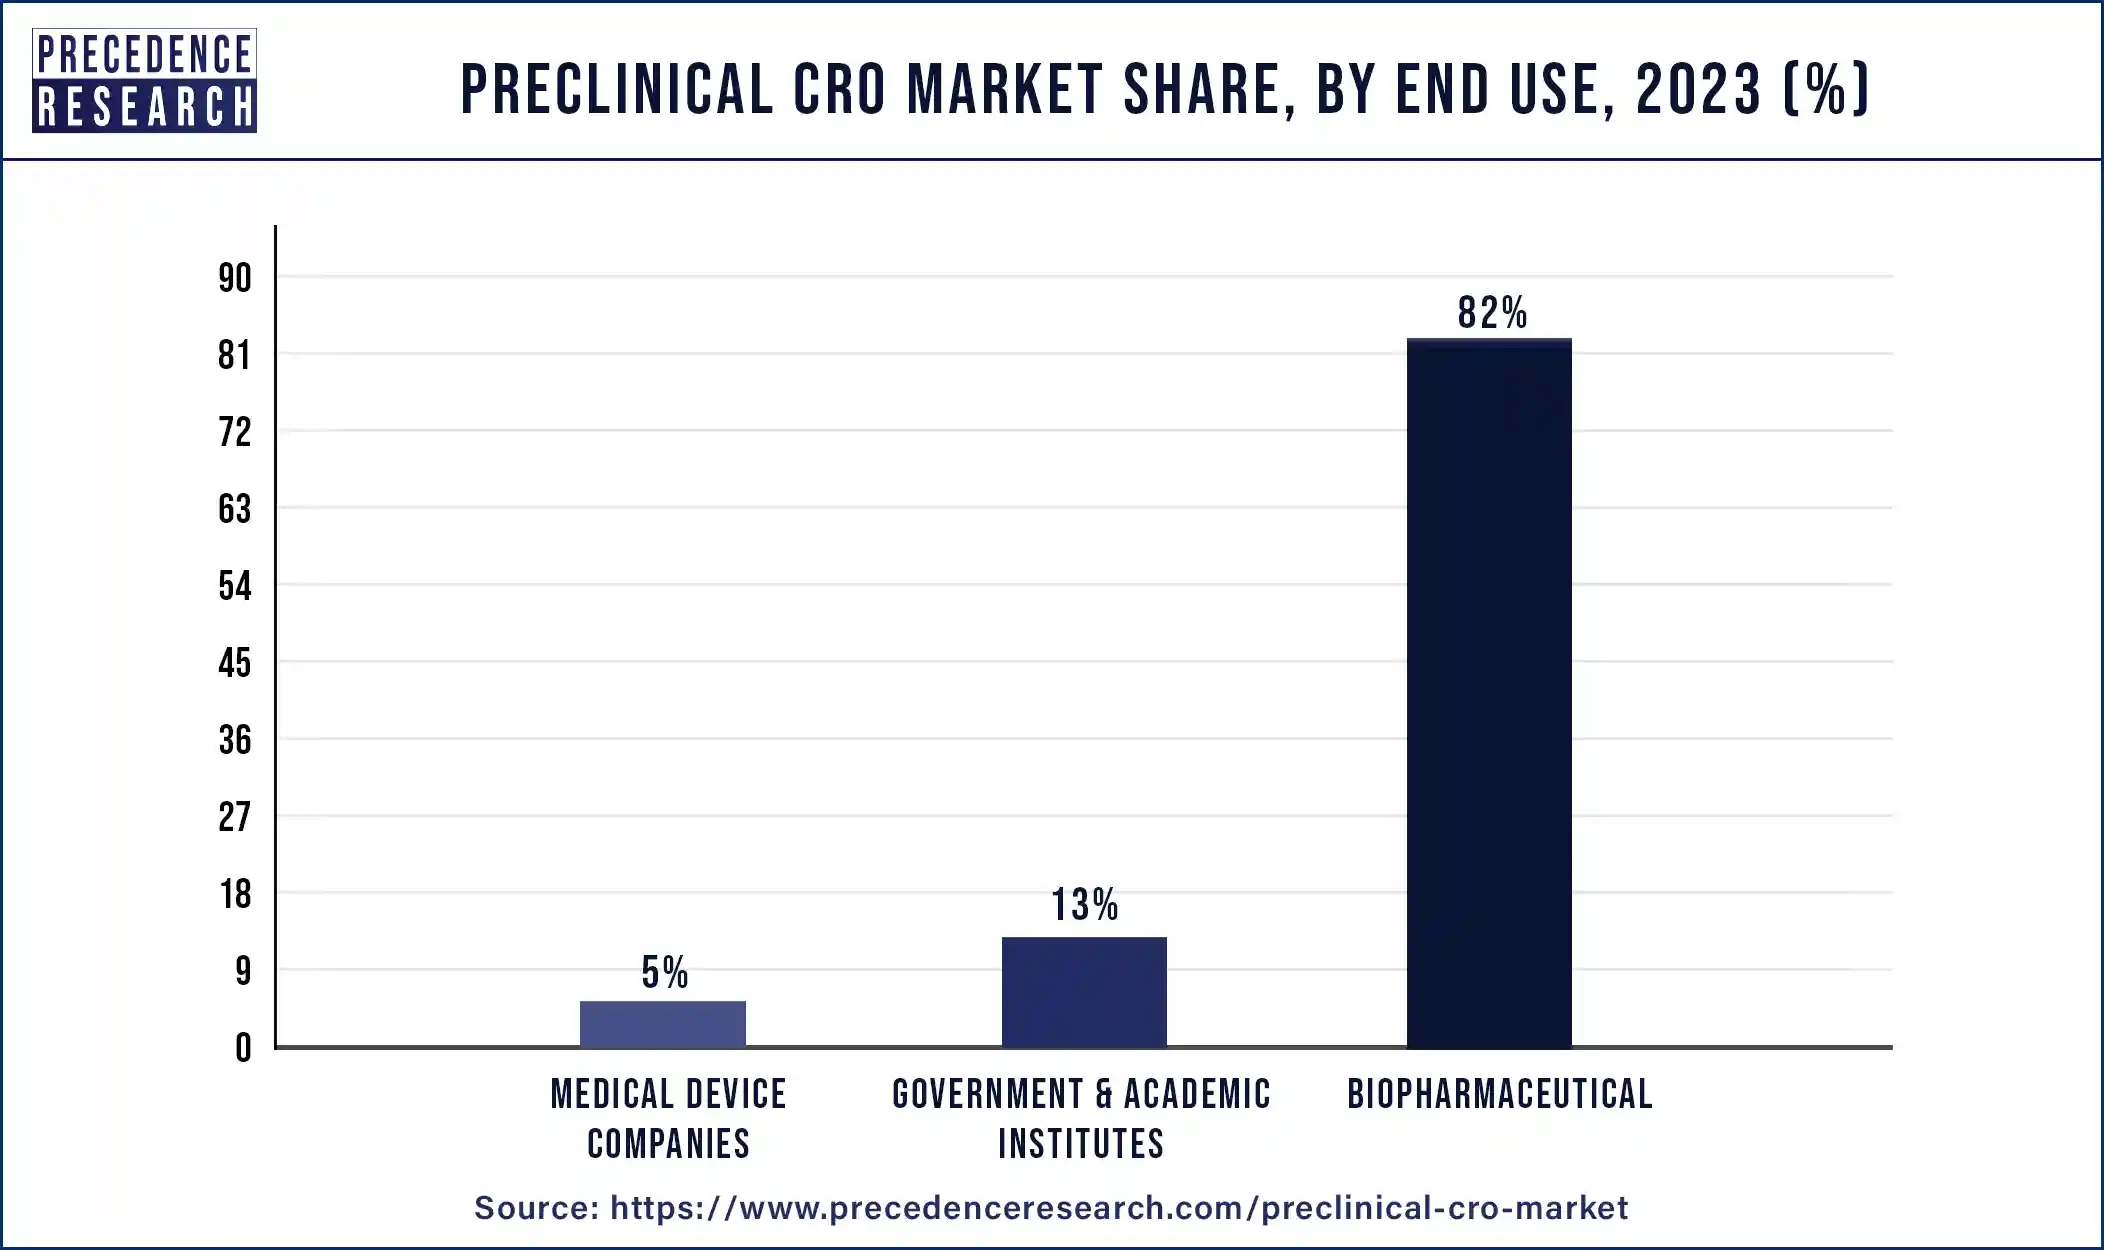 Preclinical CRO Market Share, By End Use, 2023 (%)